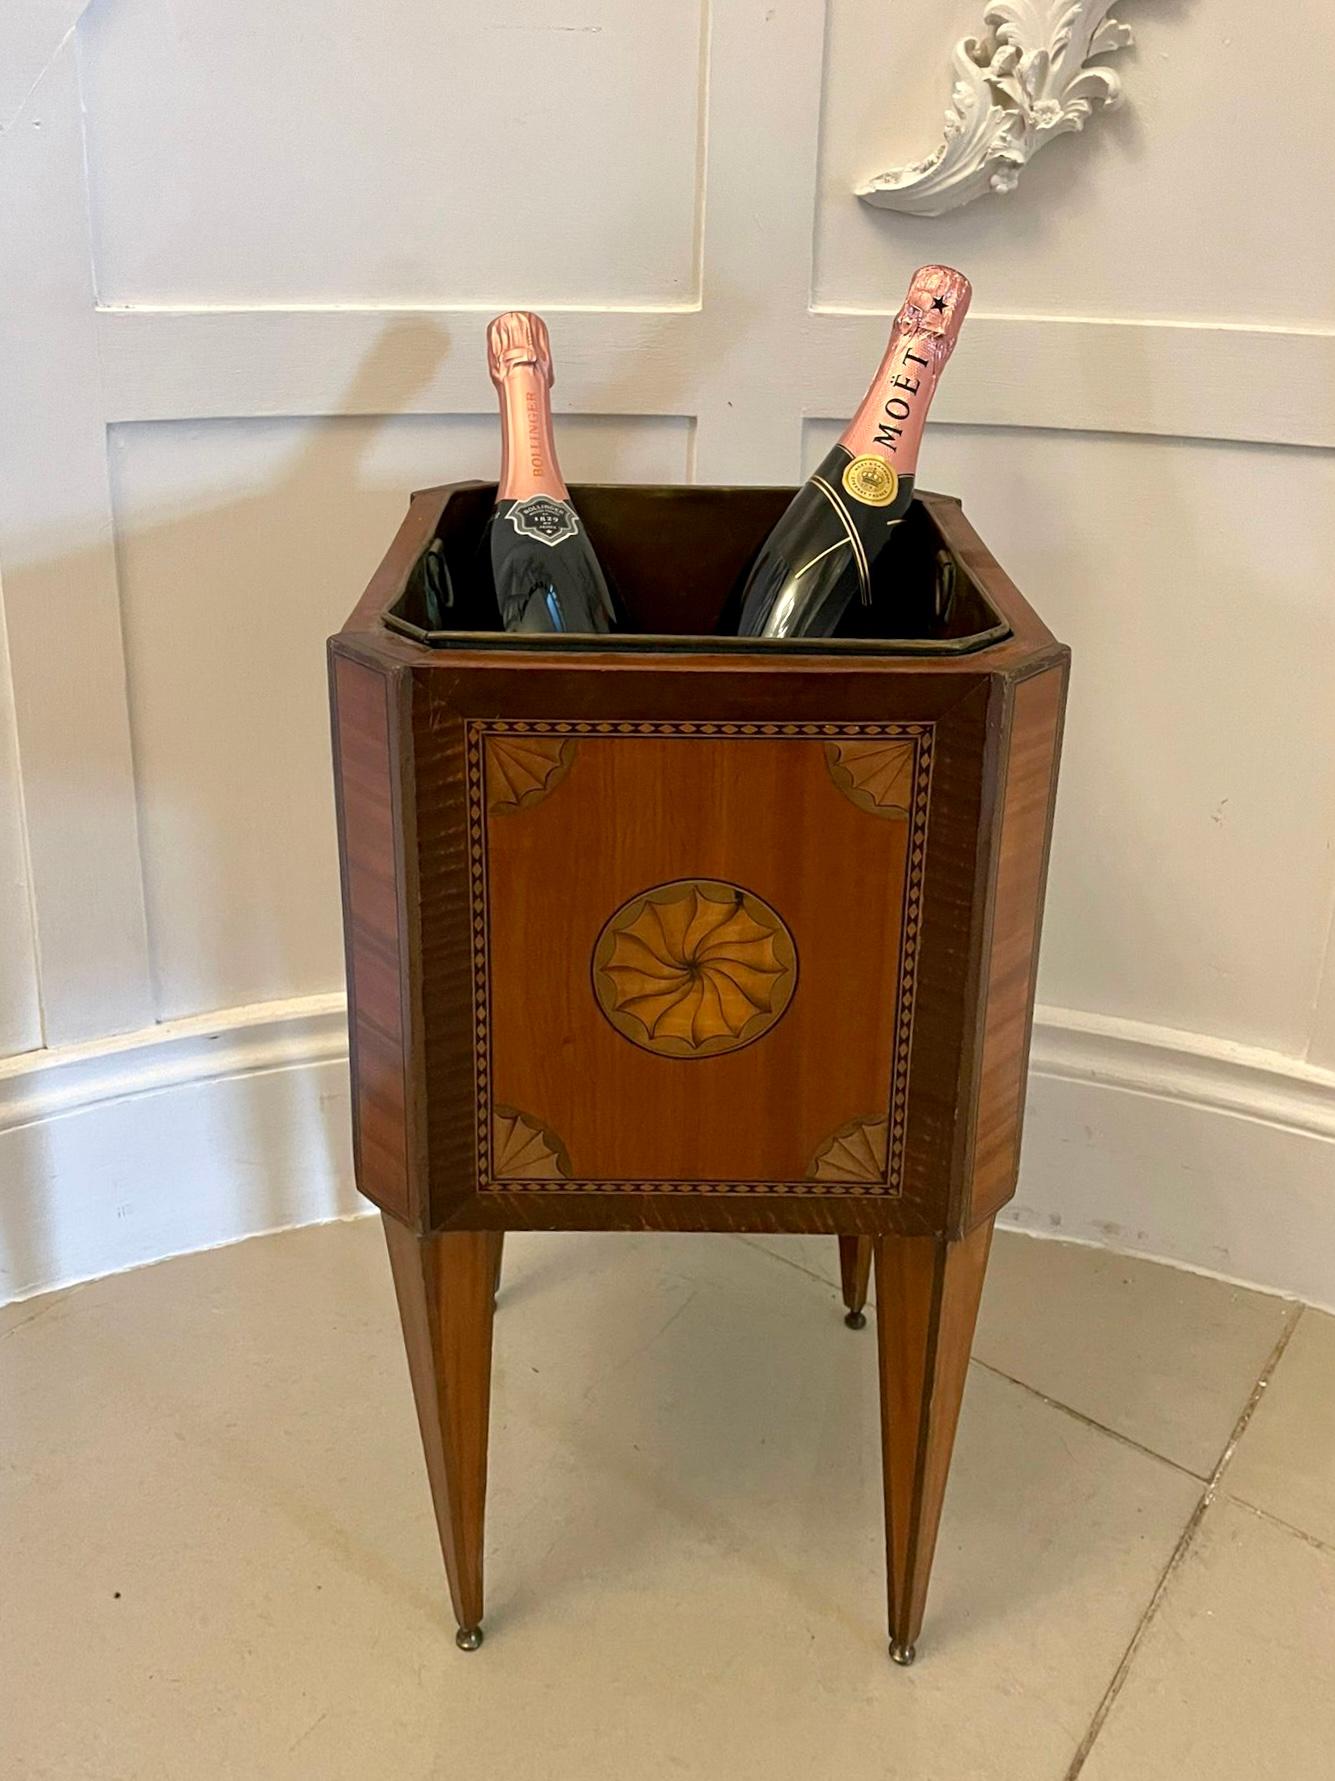 19th Century Antique George III Quality Satinwood Inlaid Freestanding Champagne/Wine Cooler For Sale